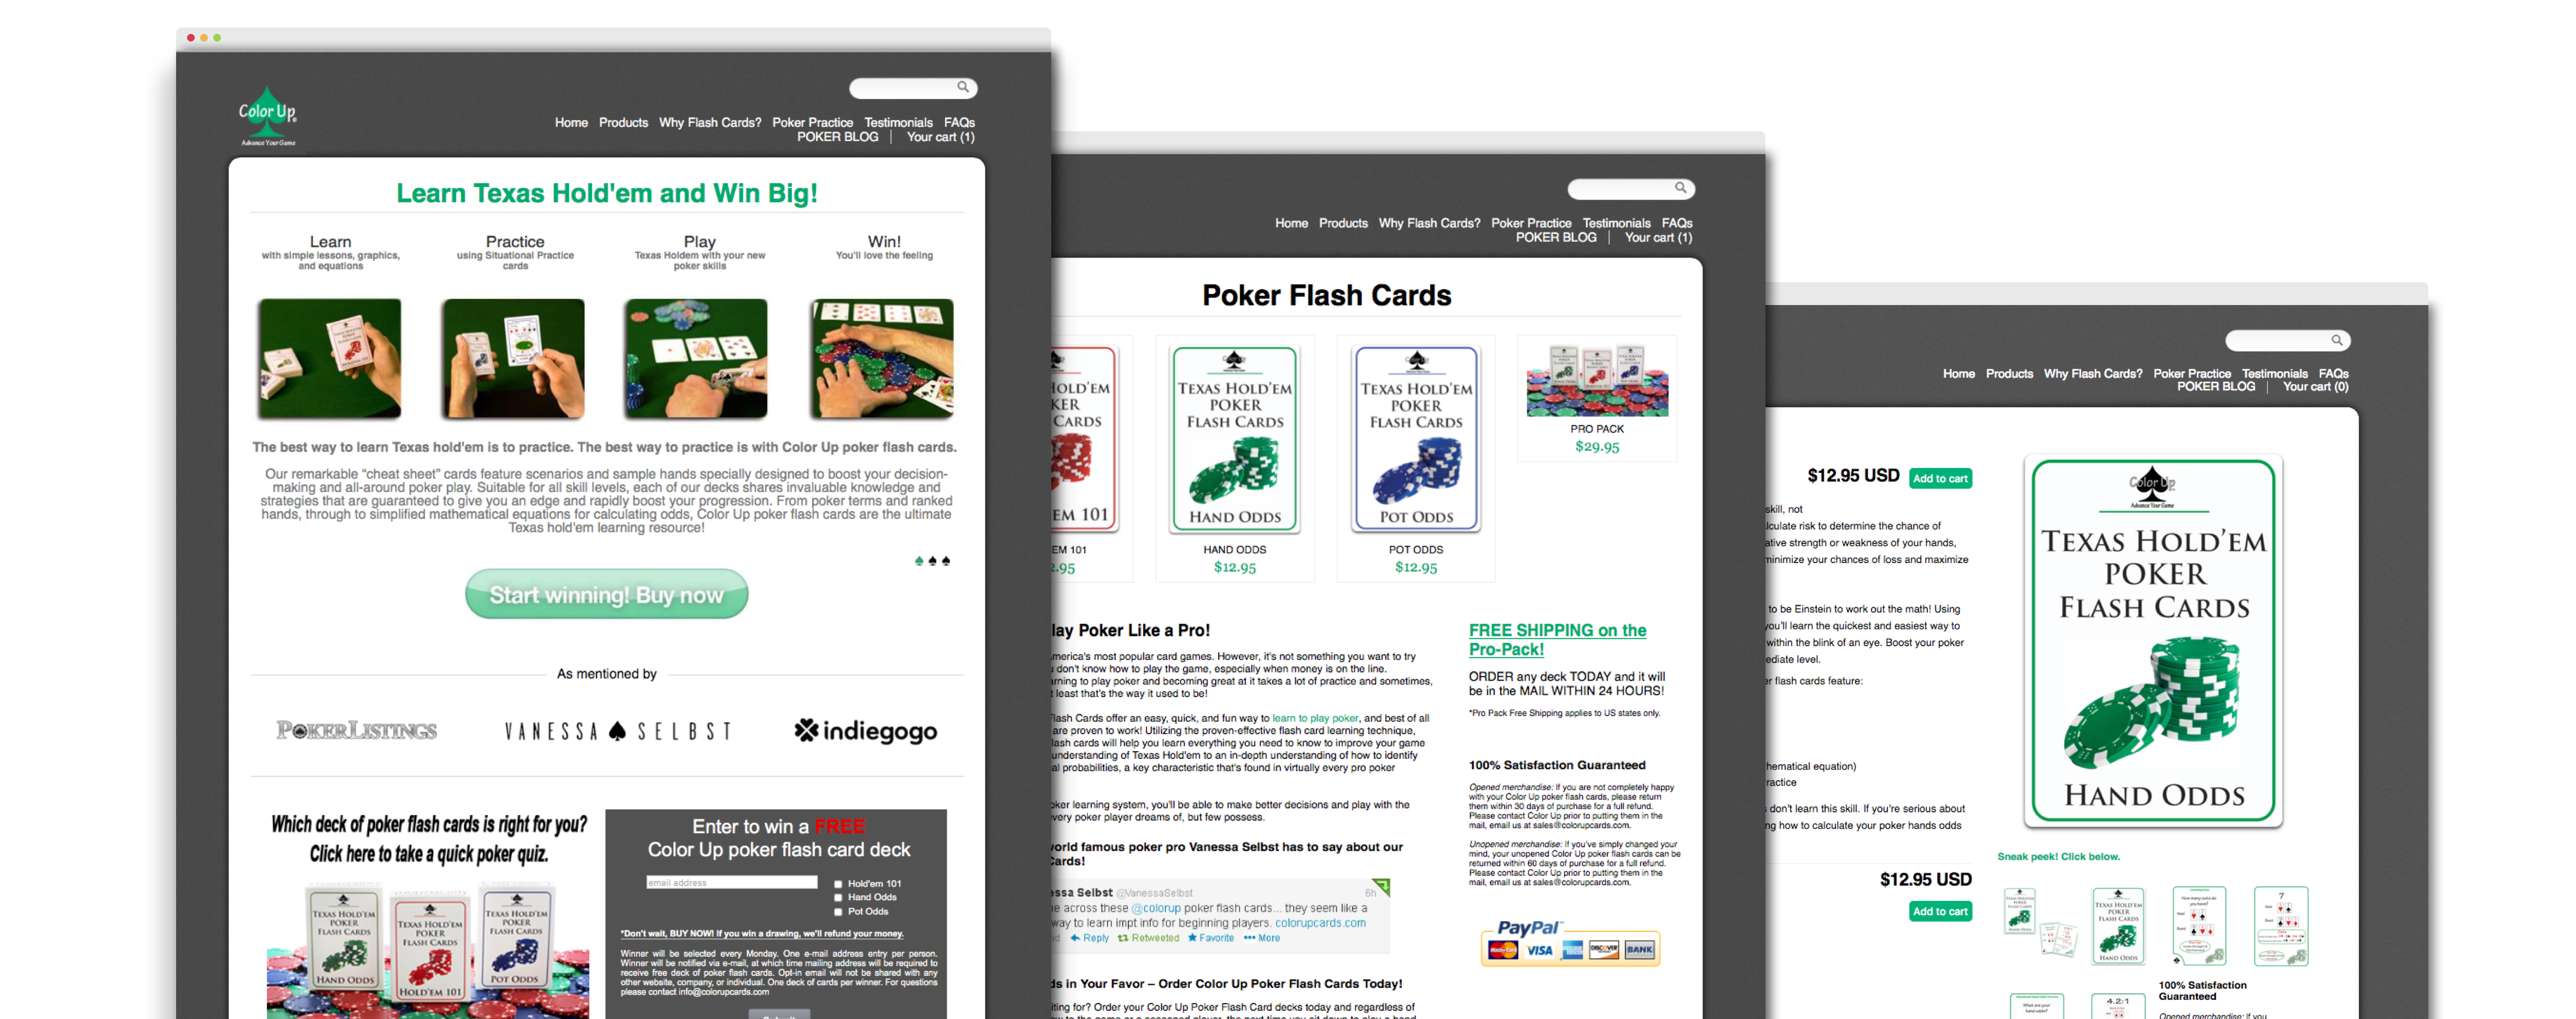 Color Up POKER FLASH CARDS HAND ODDS Learn how to win at Texas Hold'em!